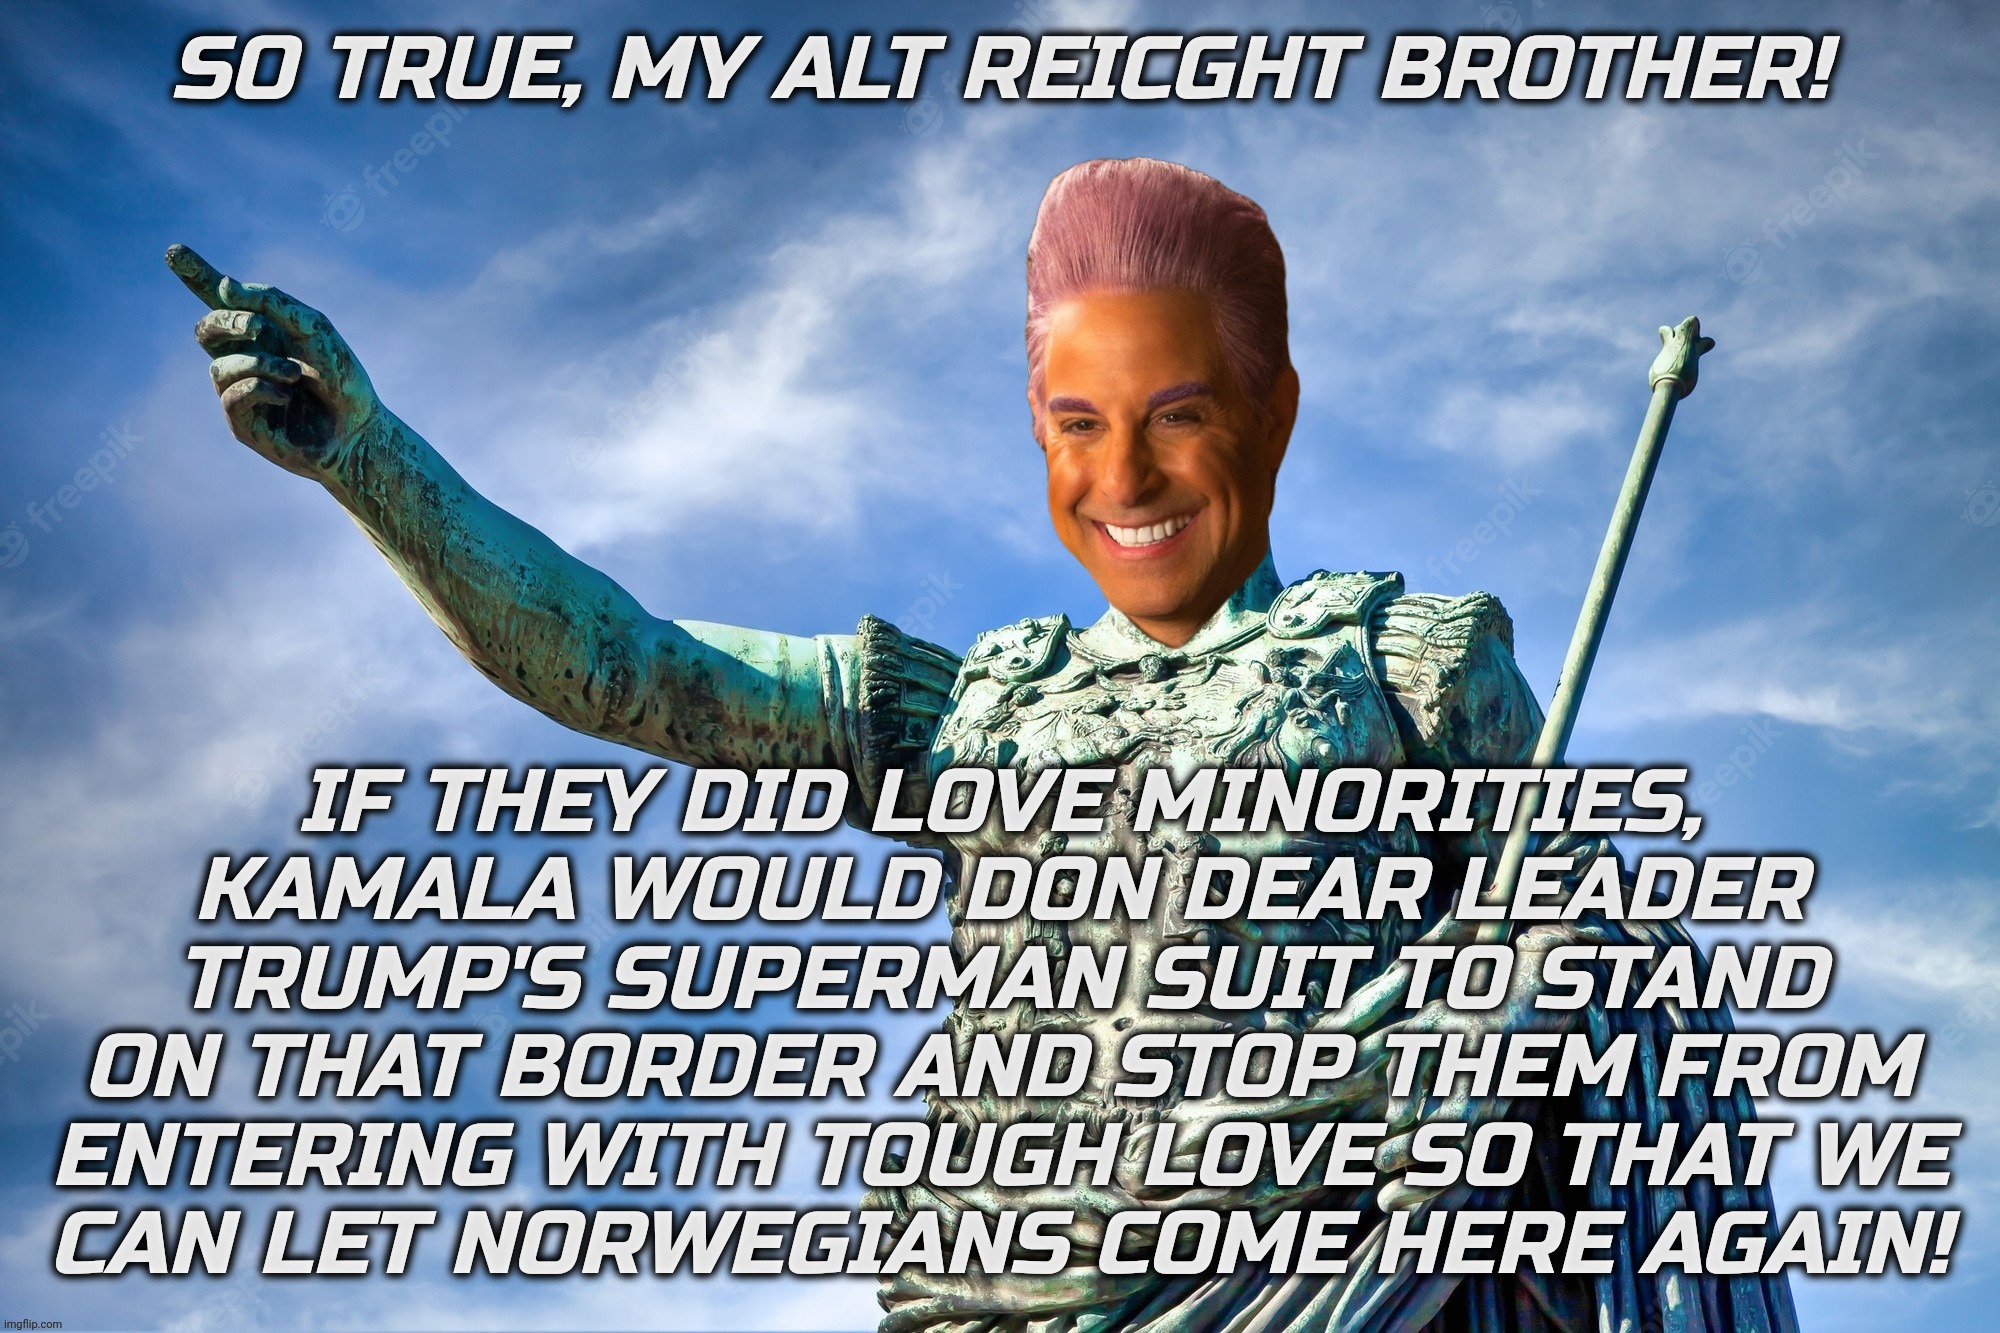 Caesar Flickerman | SO TRUE, MY ALT REICGHT BROTHER! IF THEY DID LOVE MINORITIES, KAMALA WOULD DON DEAR LEADER TRUMP'S SUPERMAN SUIT TO STAND ON THAT BORDER AND | image tagged in caesar flickerman | made w/ Imgflip meme maker